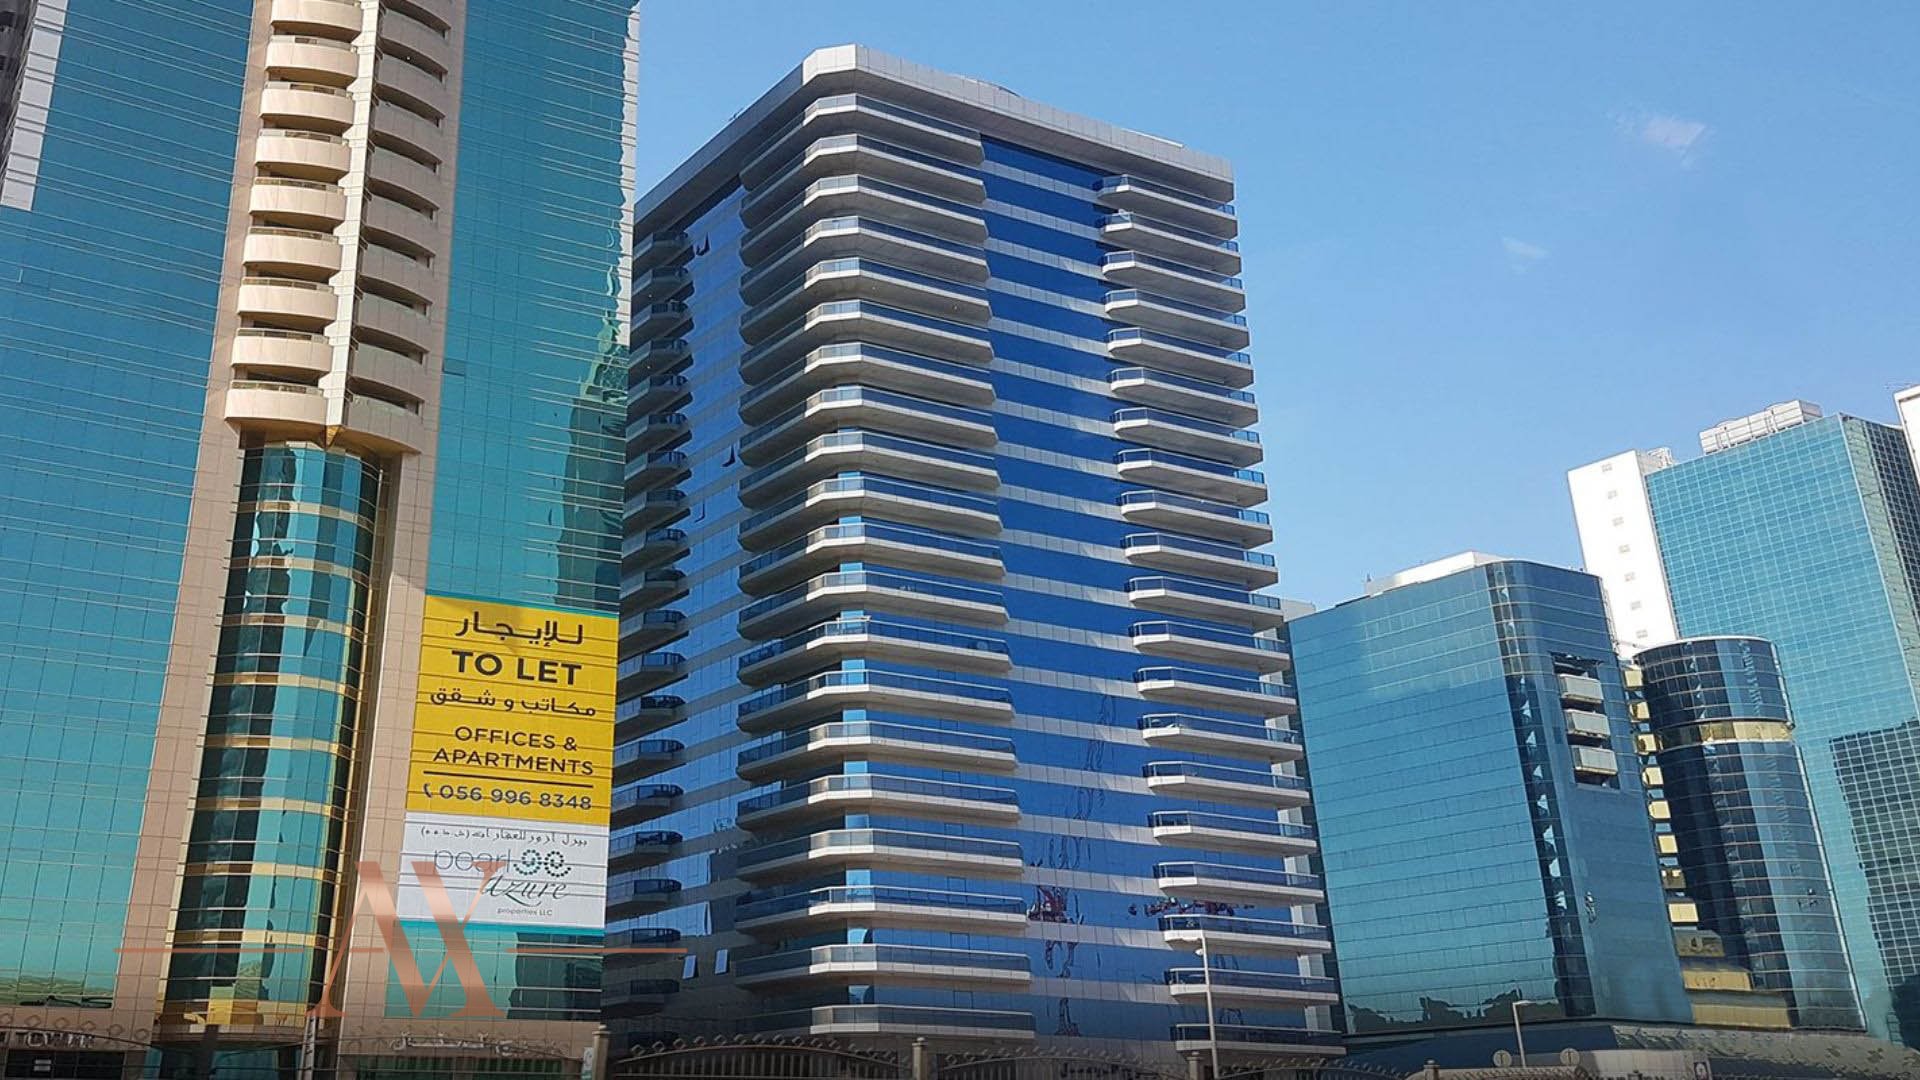 AL WASL TOWER property for sale with Bitcoin & Cryptocurrency - photo 1